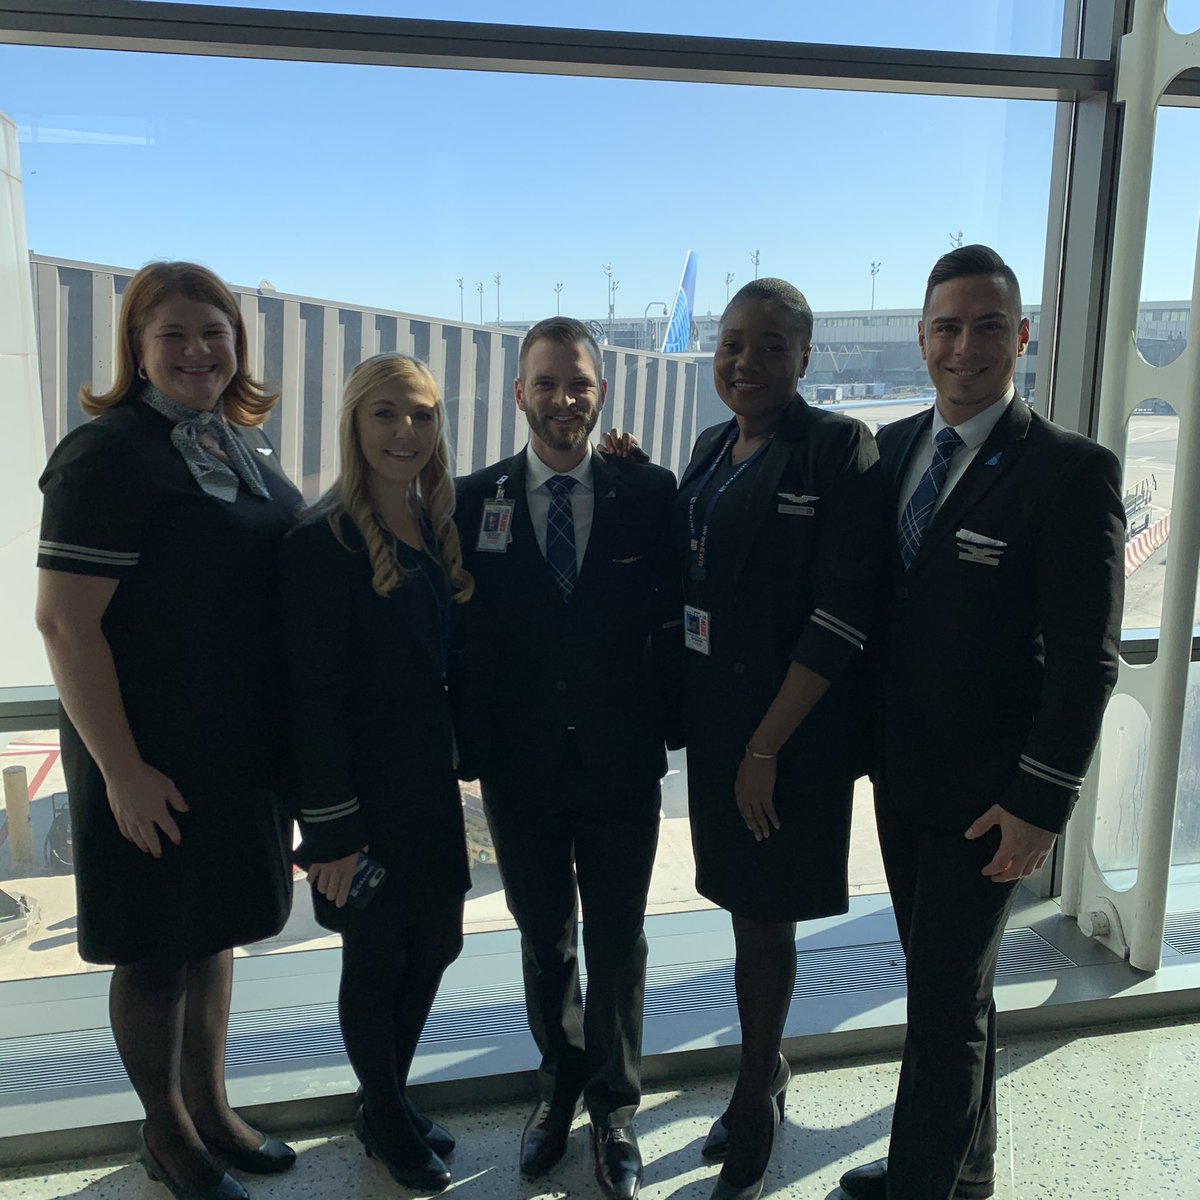 EWR Inflight Supporting Girls in Aviation Day and how lucky to be onboard #HerArtHere @weareunited @EWR_SW #UAIFSbaseEWR @StacyC_United @nbyunriedel @lisa_pizzimenti @united